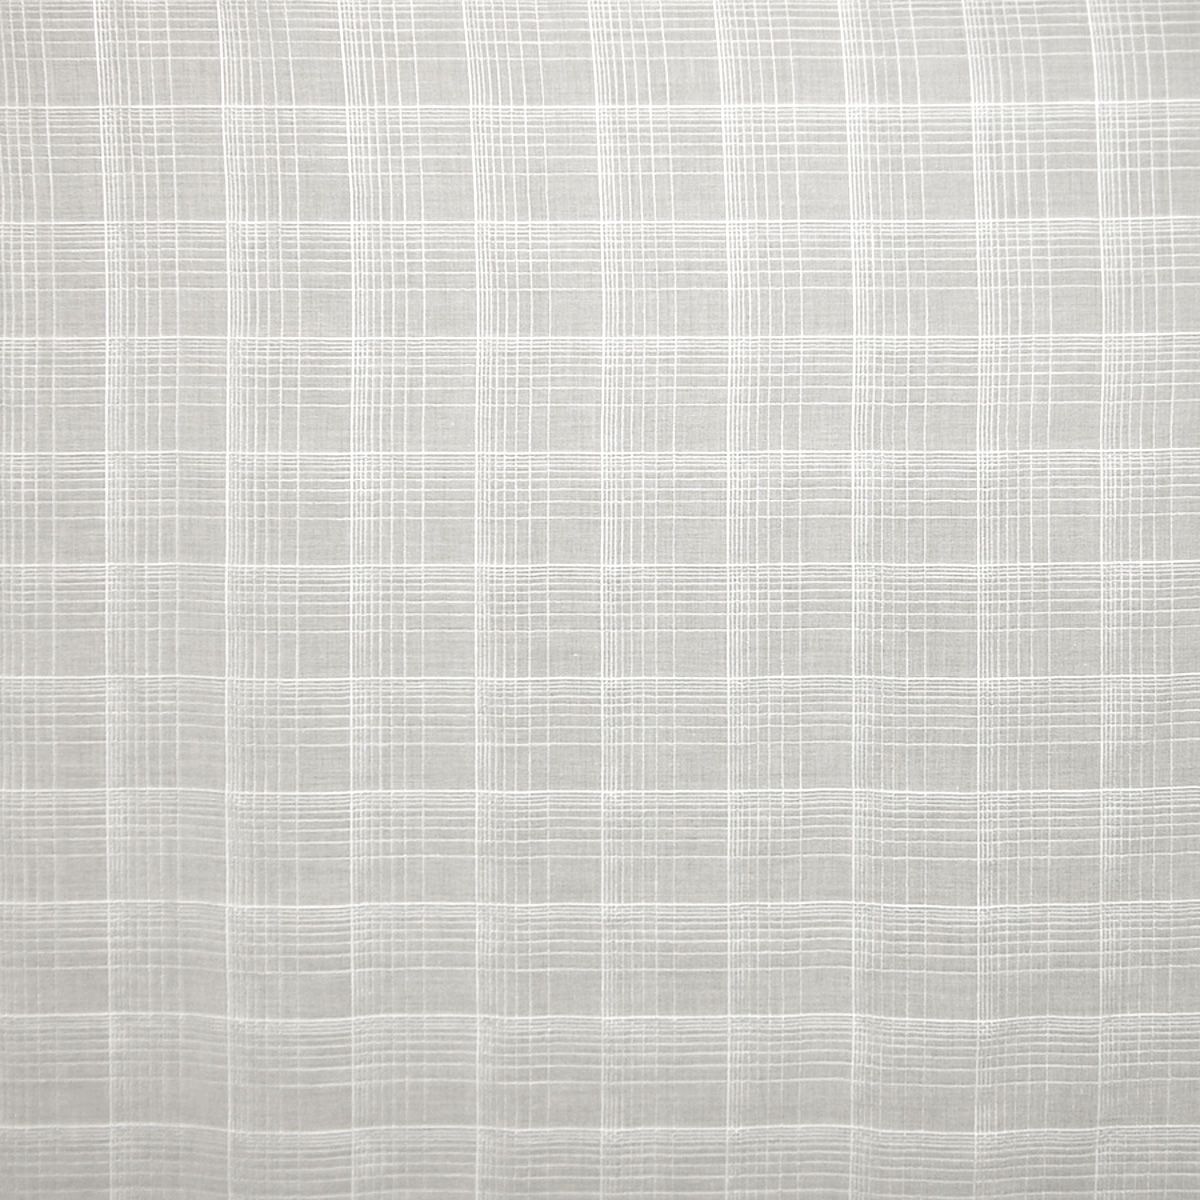 Fieldston Sheer fabric in white color - pattern number RW 00011805 - by Scalamandre in the Old World Weavers collection